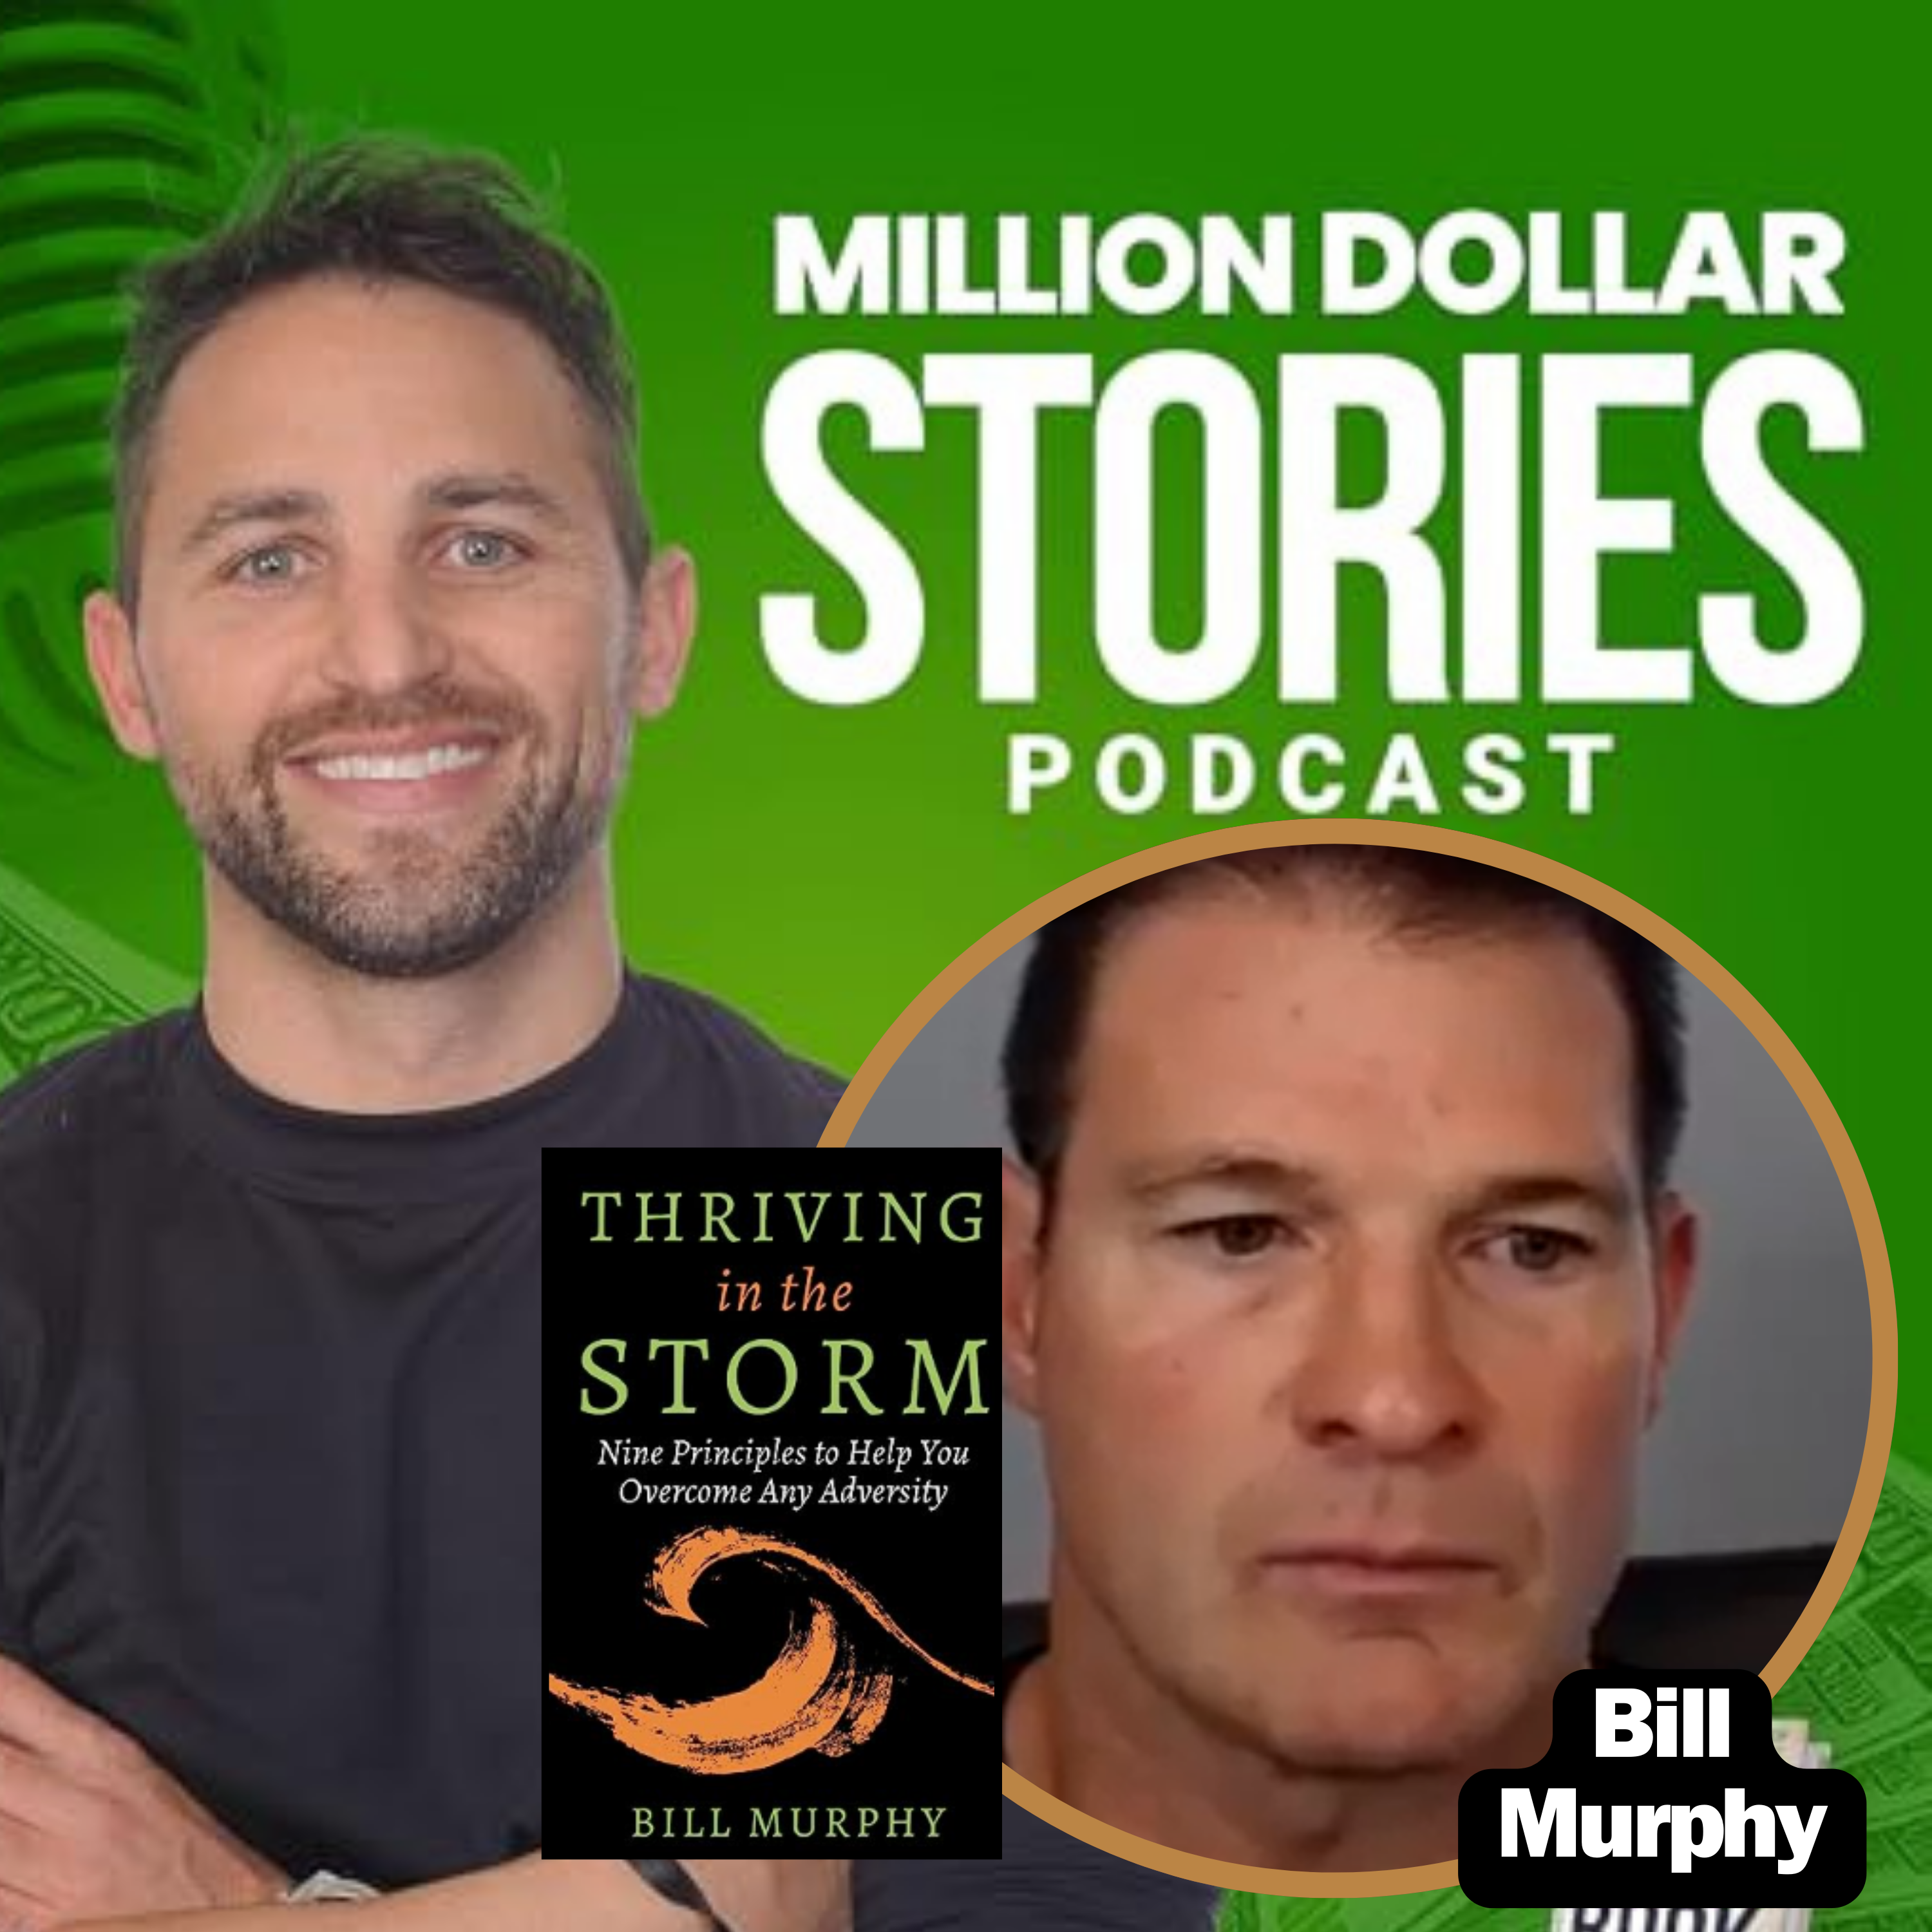 Bill Murphy – Author of “Thriving in the Storm: 9 Principles to Help You Overcome Any Adversity”